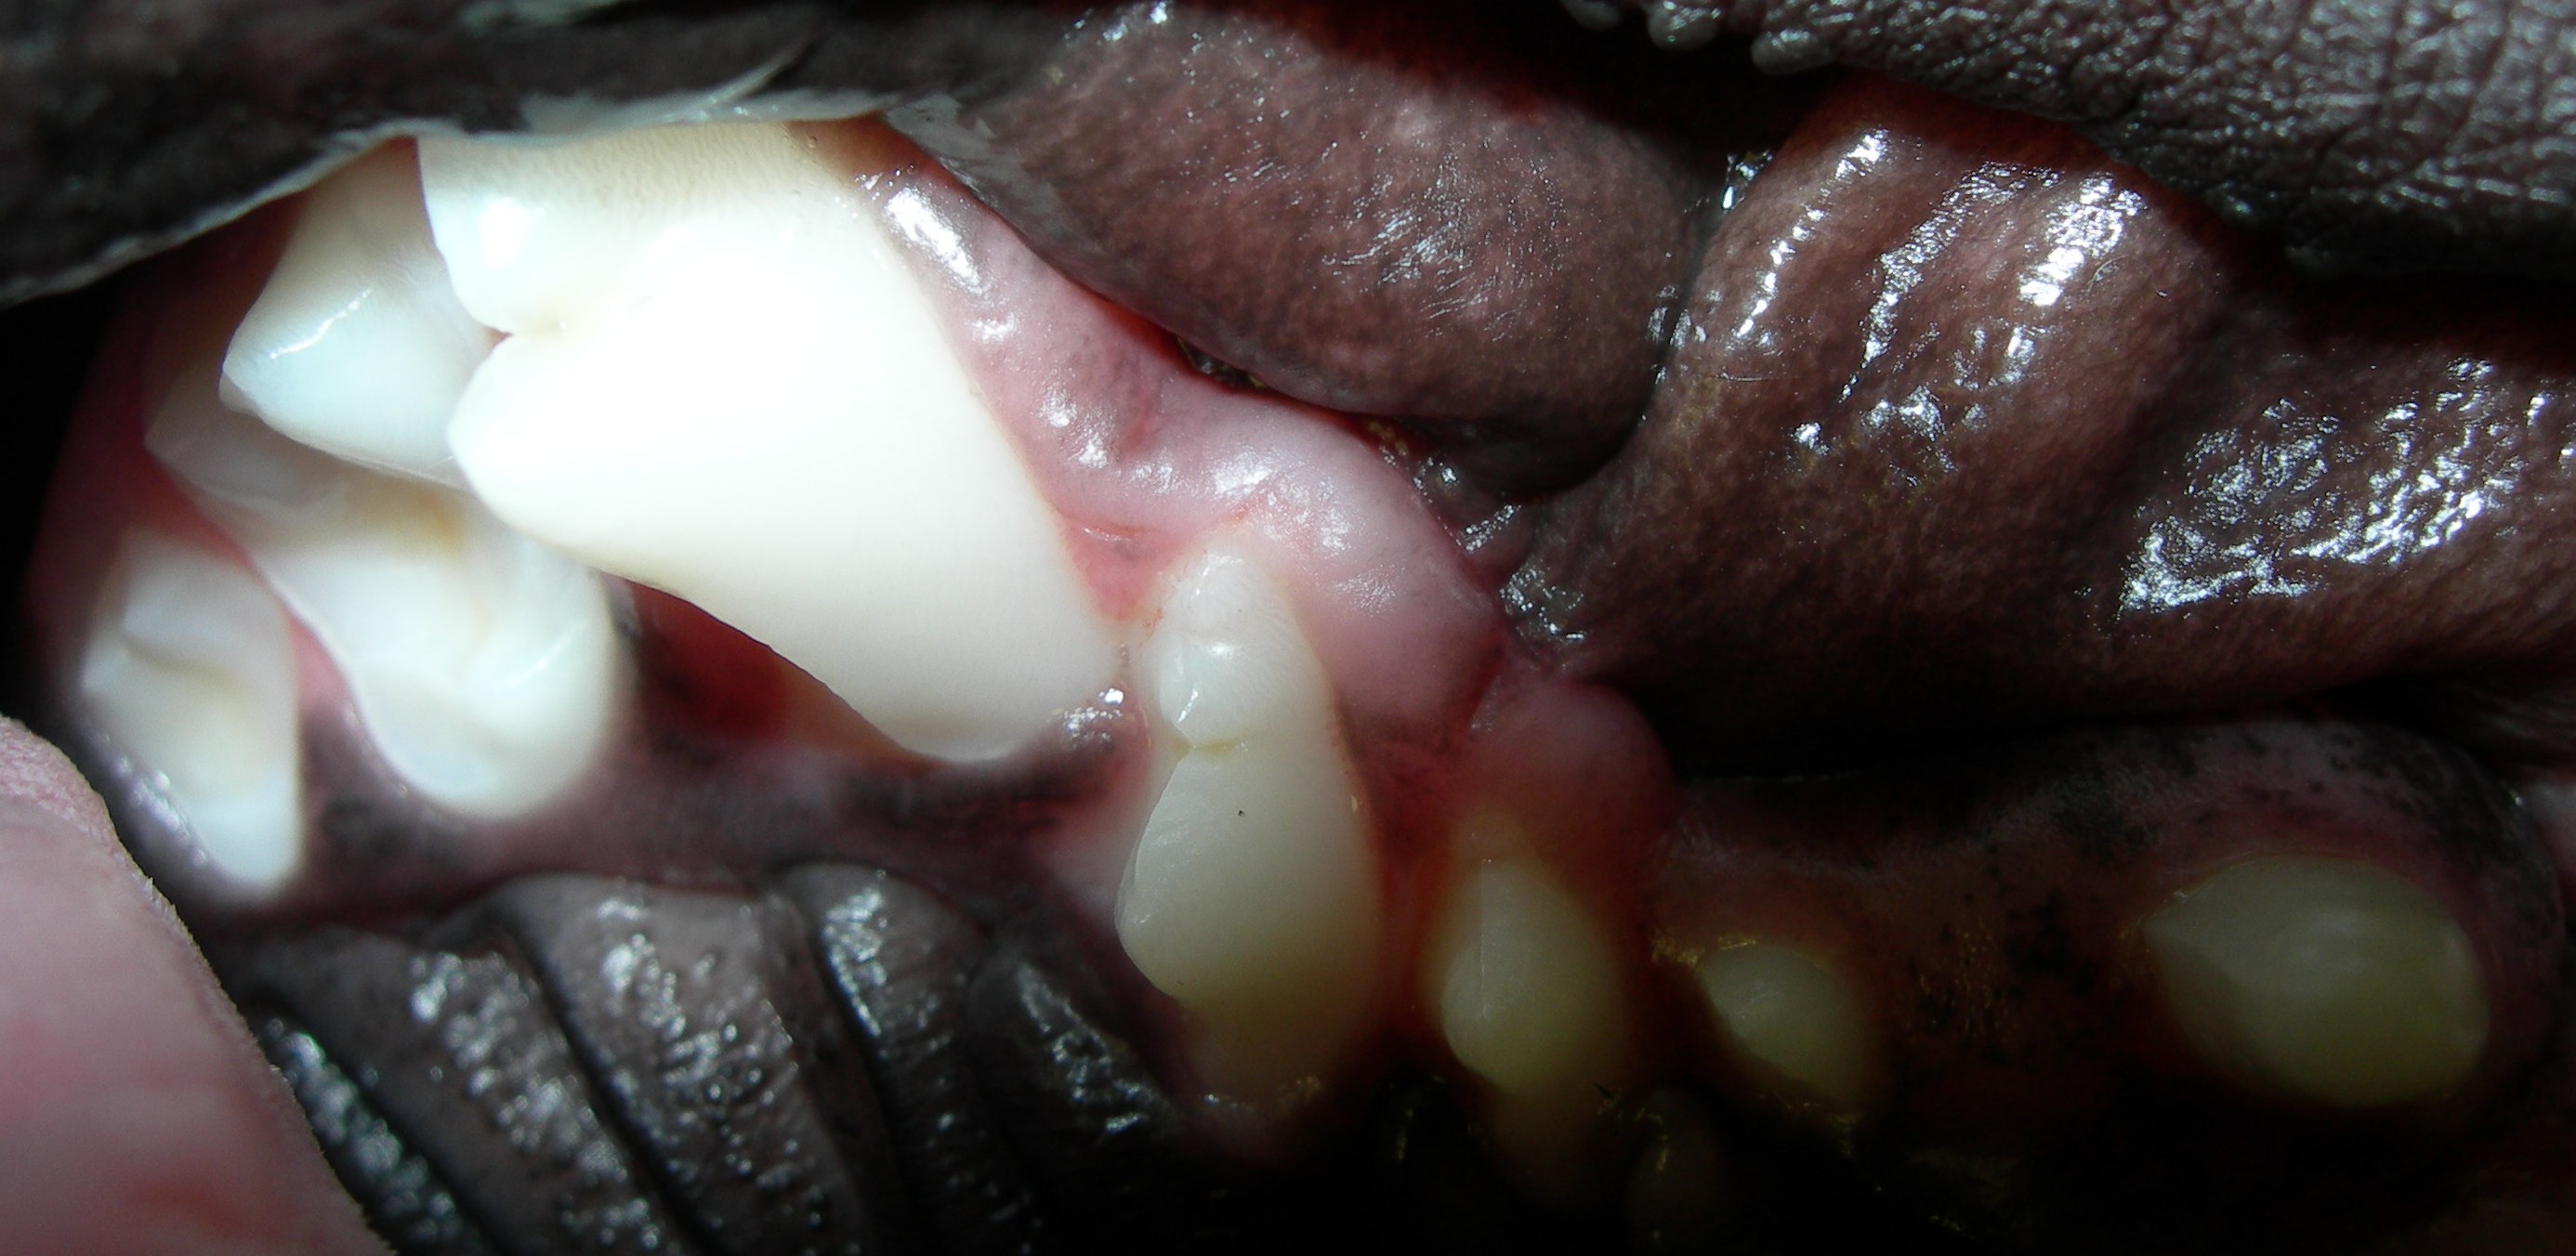 See the contact between the larger and smaller tooth? Both with be lost if nothing is done.